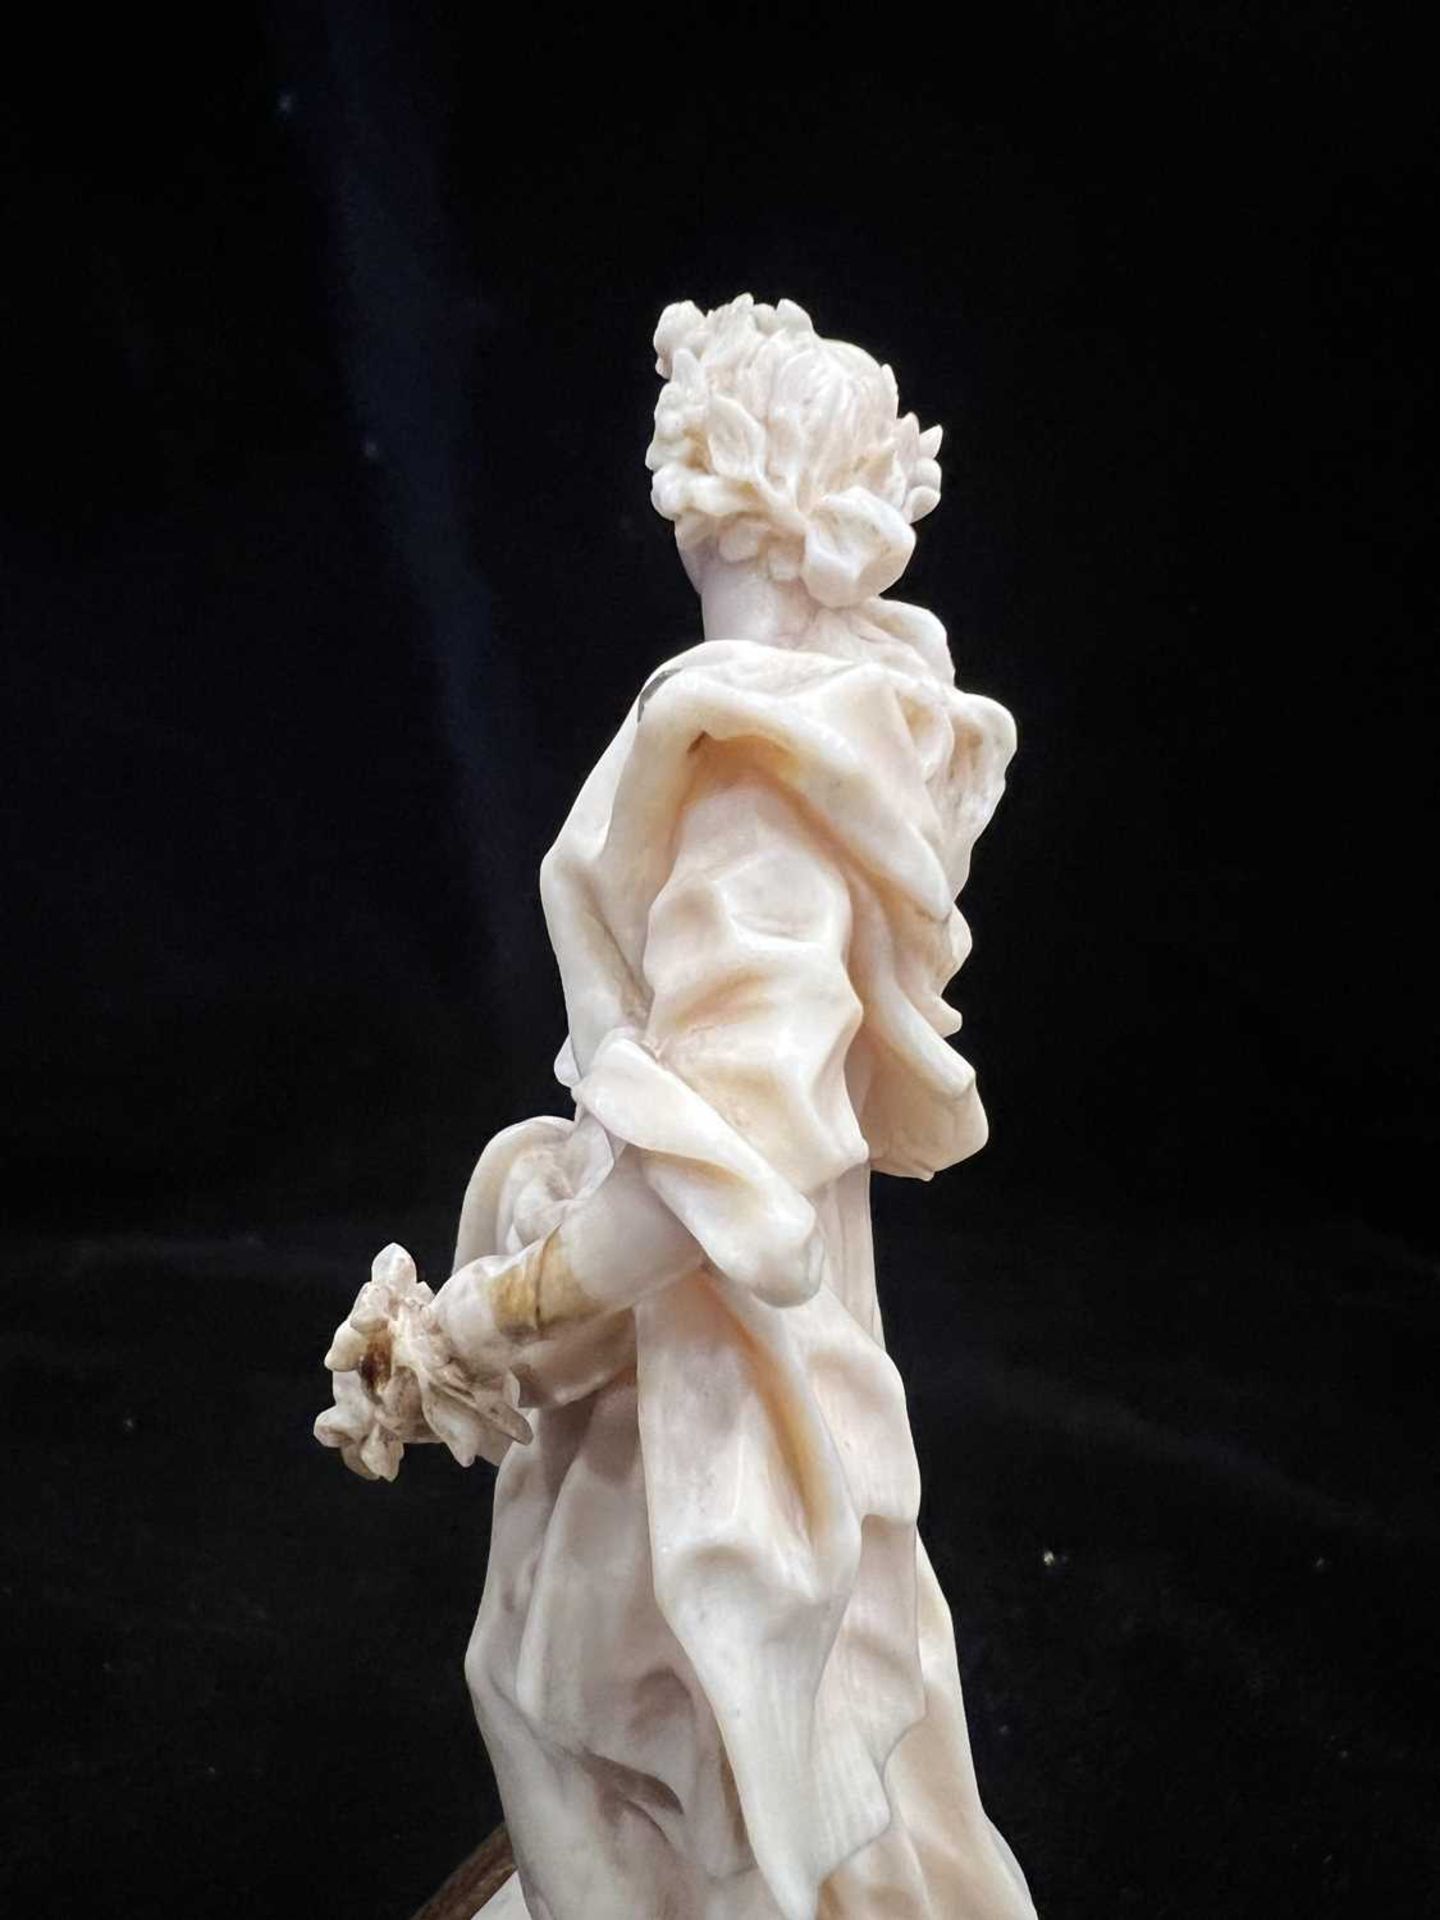 H.R.H PRINCESS MARGARET'S WEDDING GIFT: A PAIR OF 18TH CENTURY IVORY FIGURES OF SPRING AND AUTUMN - Image 6 of 14